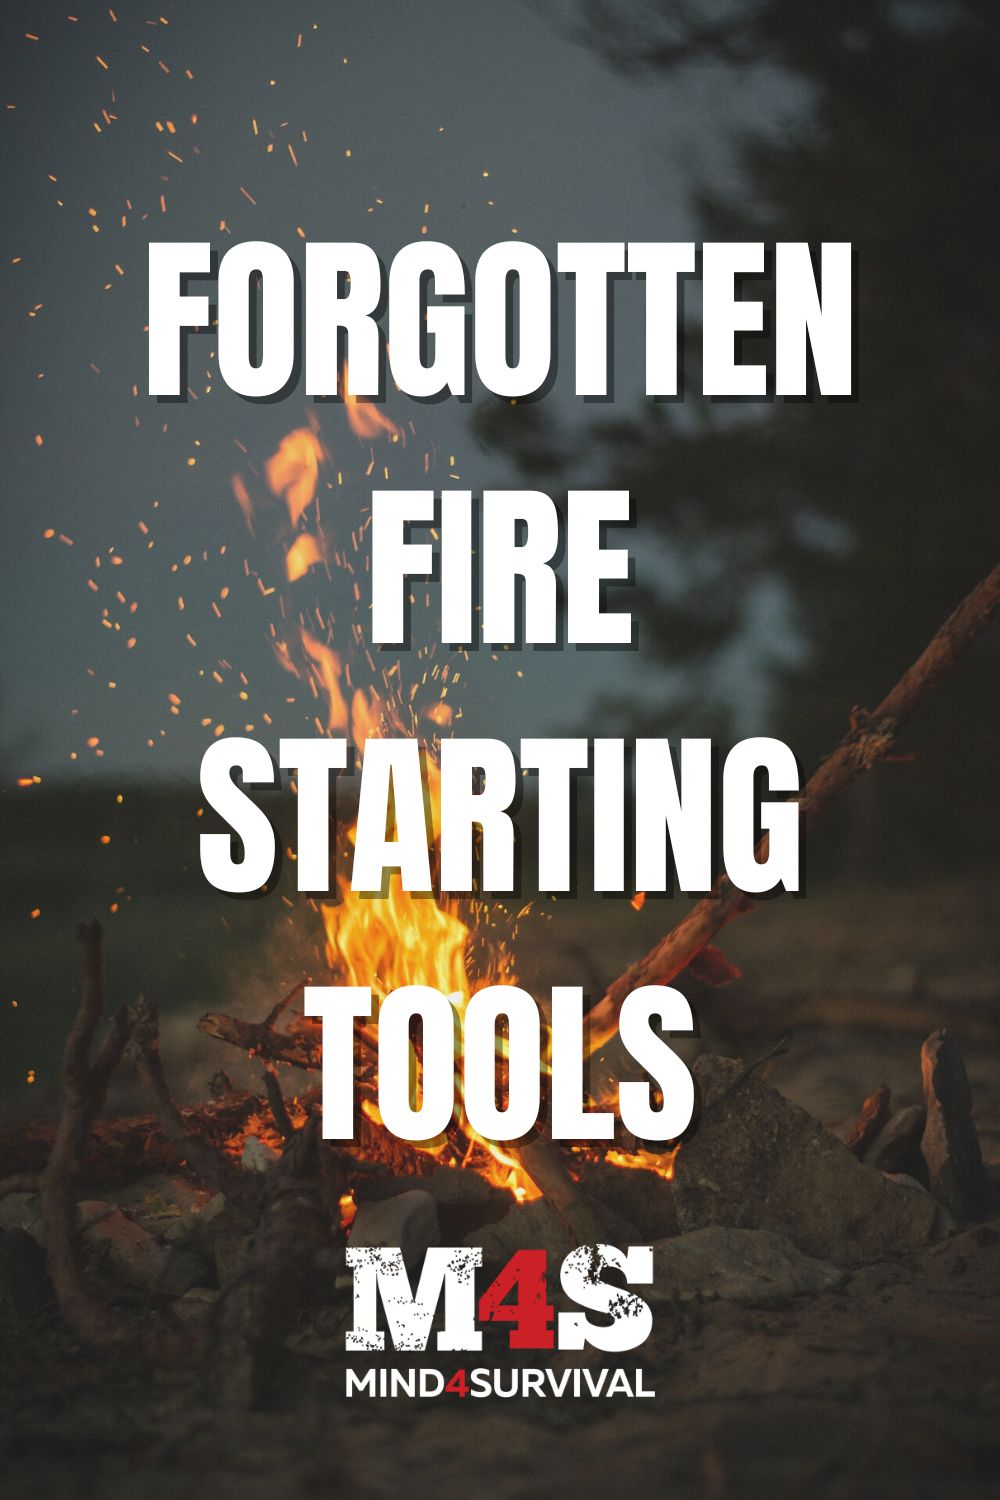 What Are the Fire-Starting Tools Preppers Forget About?